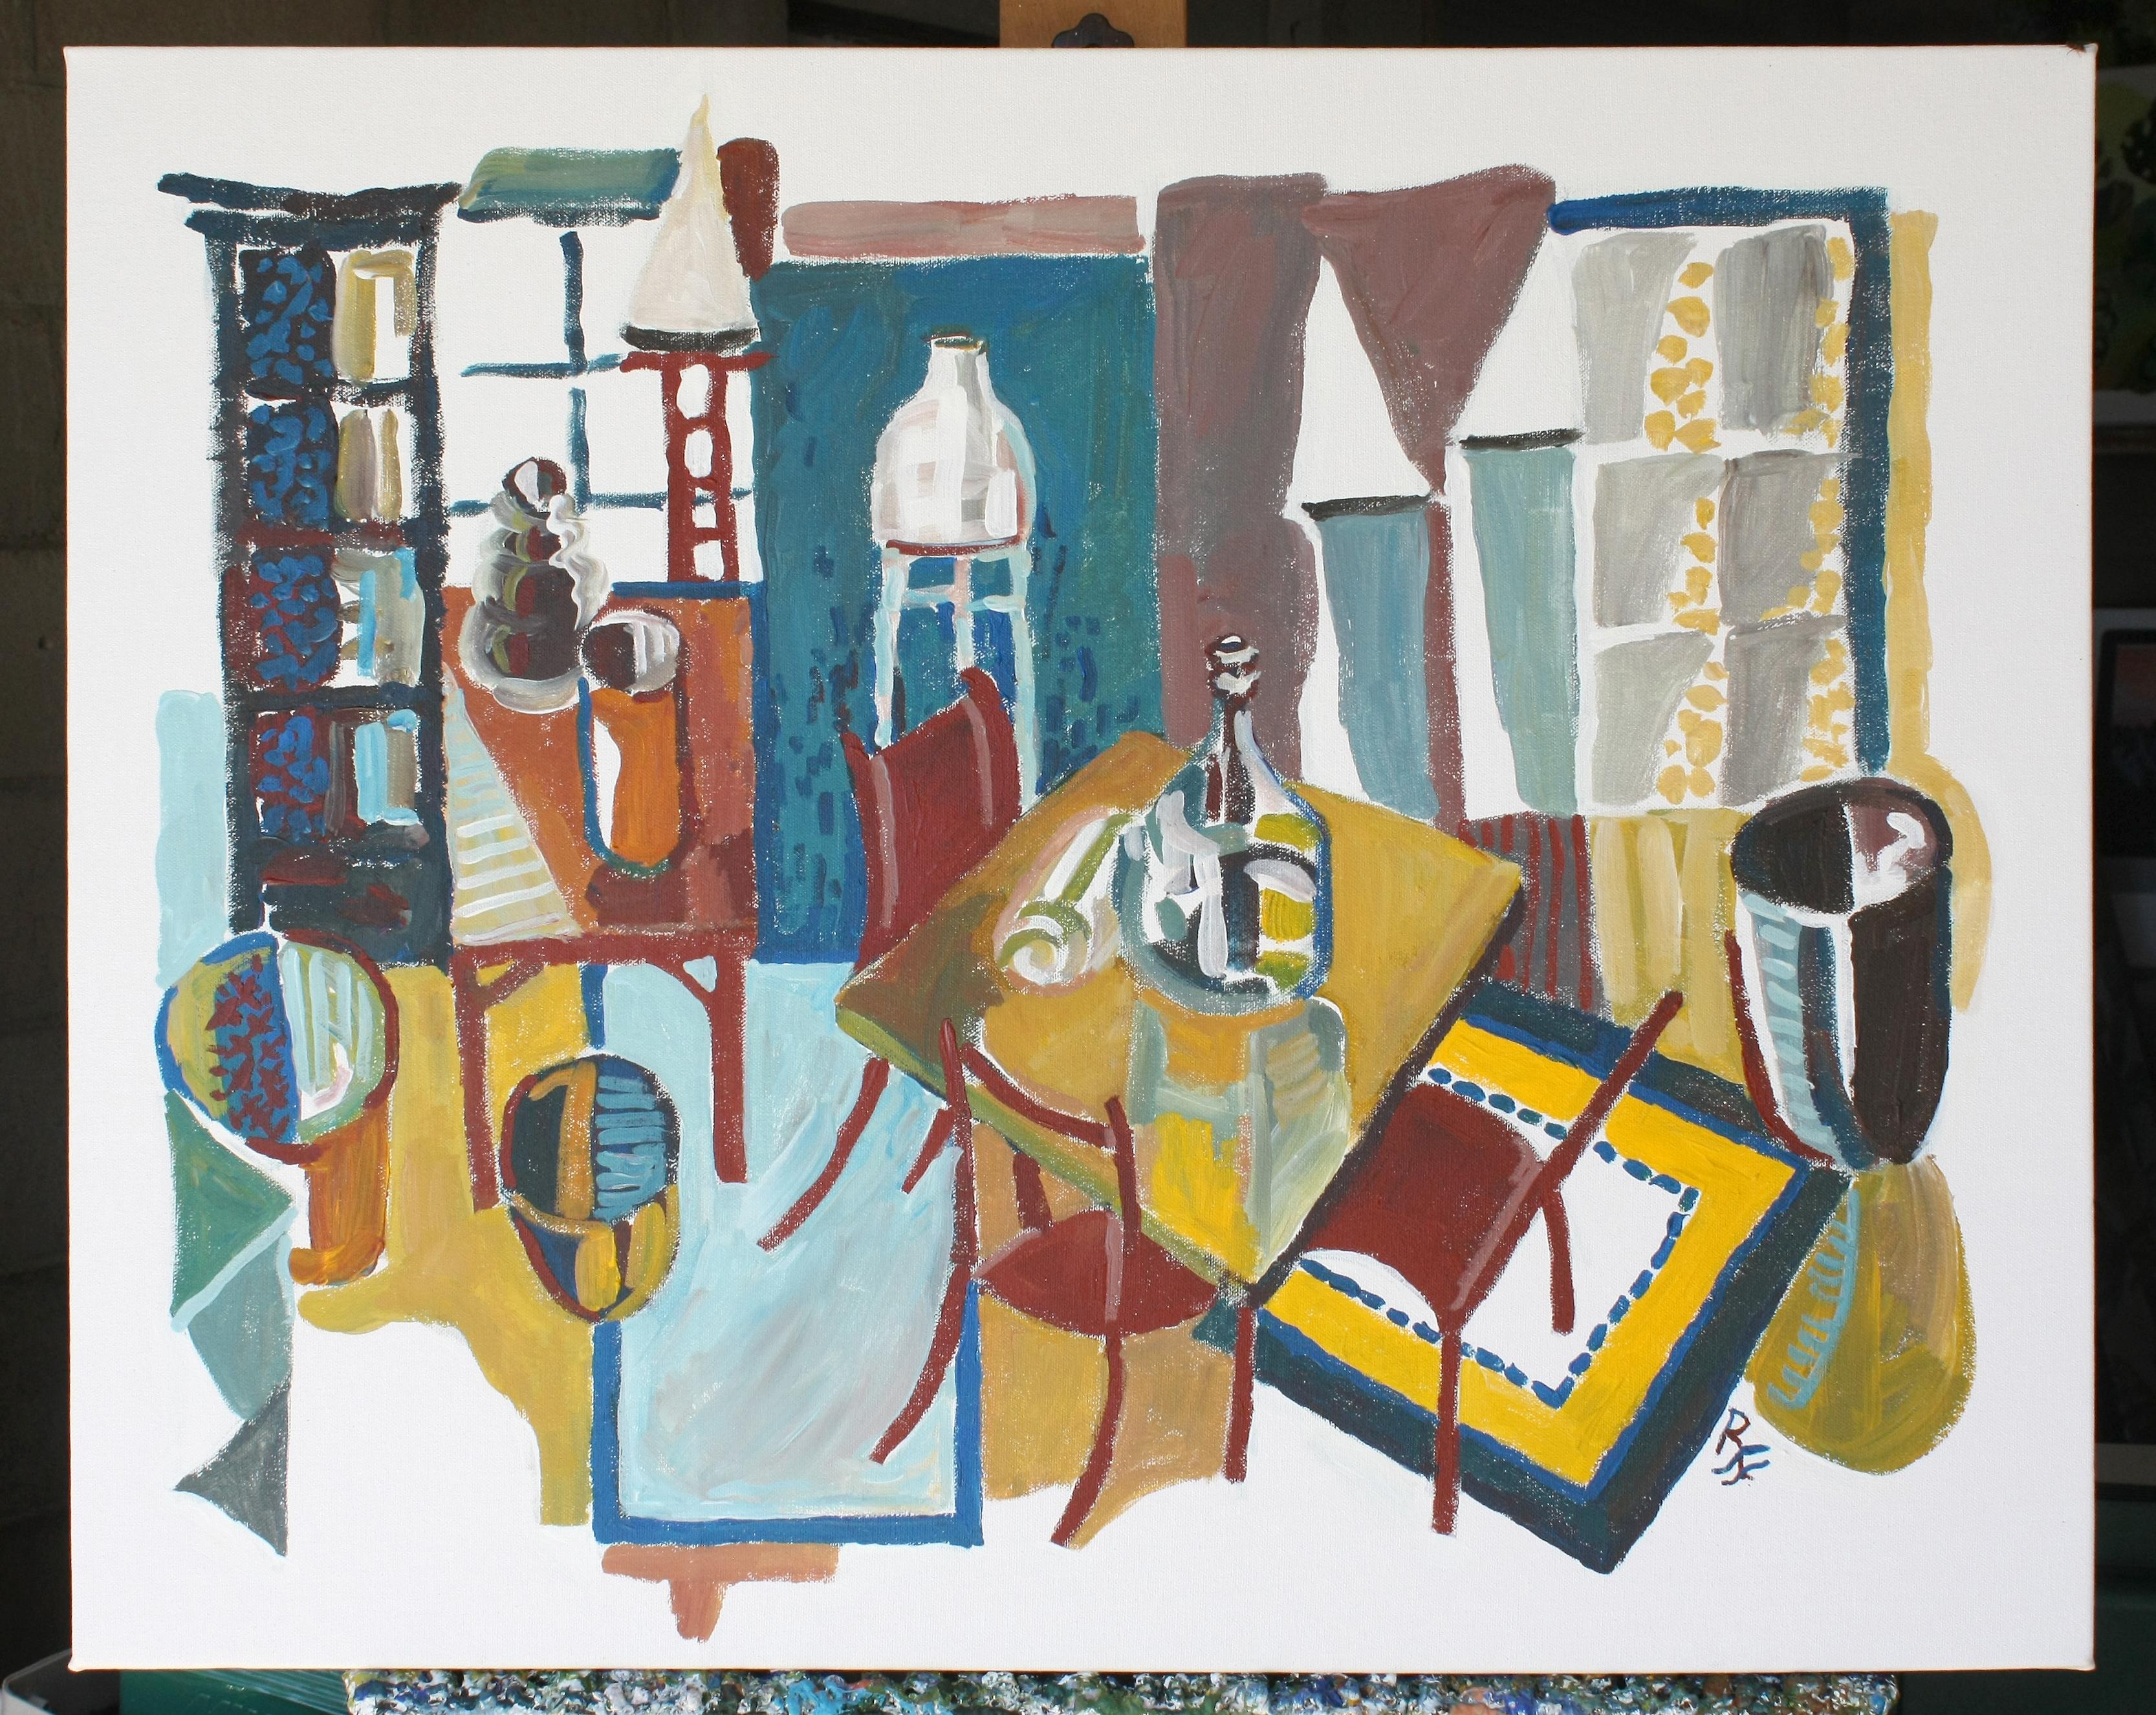 <p>Artist Comments<br>Artist Robert Hofherr exhibits the whimsical interior of an antique shop transformed using pattern, and stylized rendering. He creates an interesting 